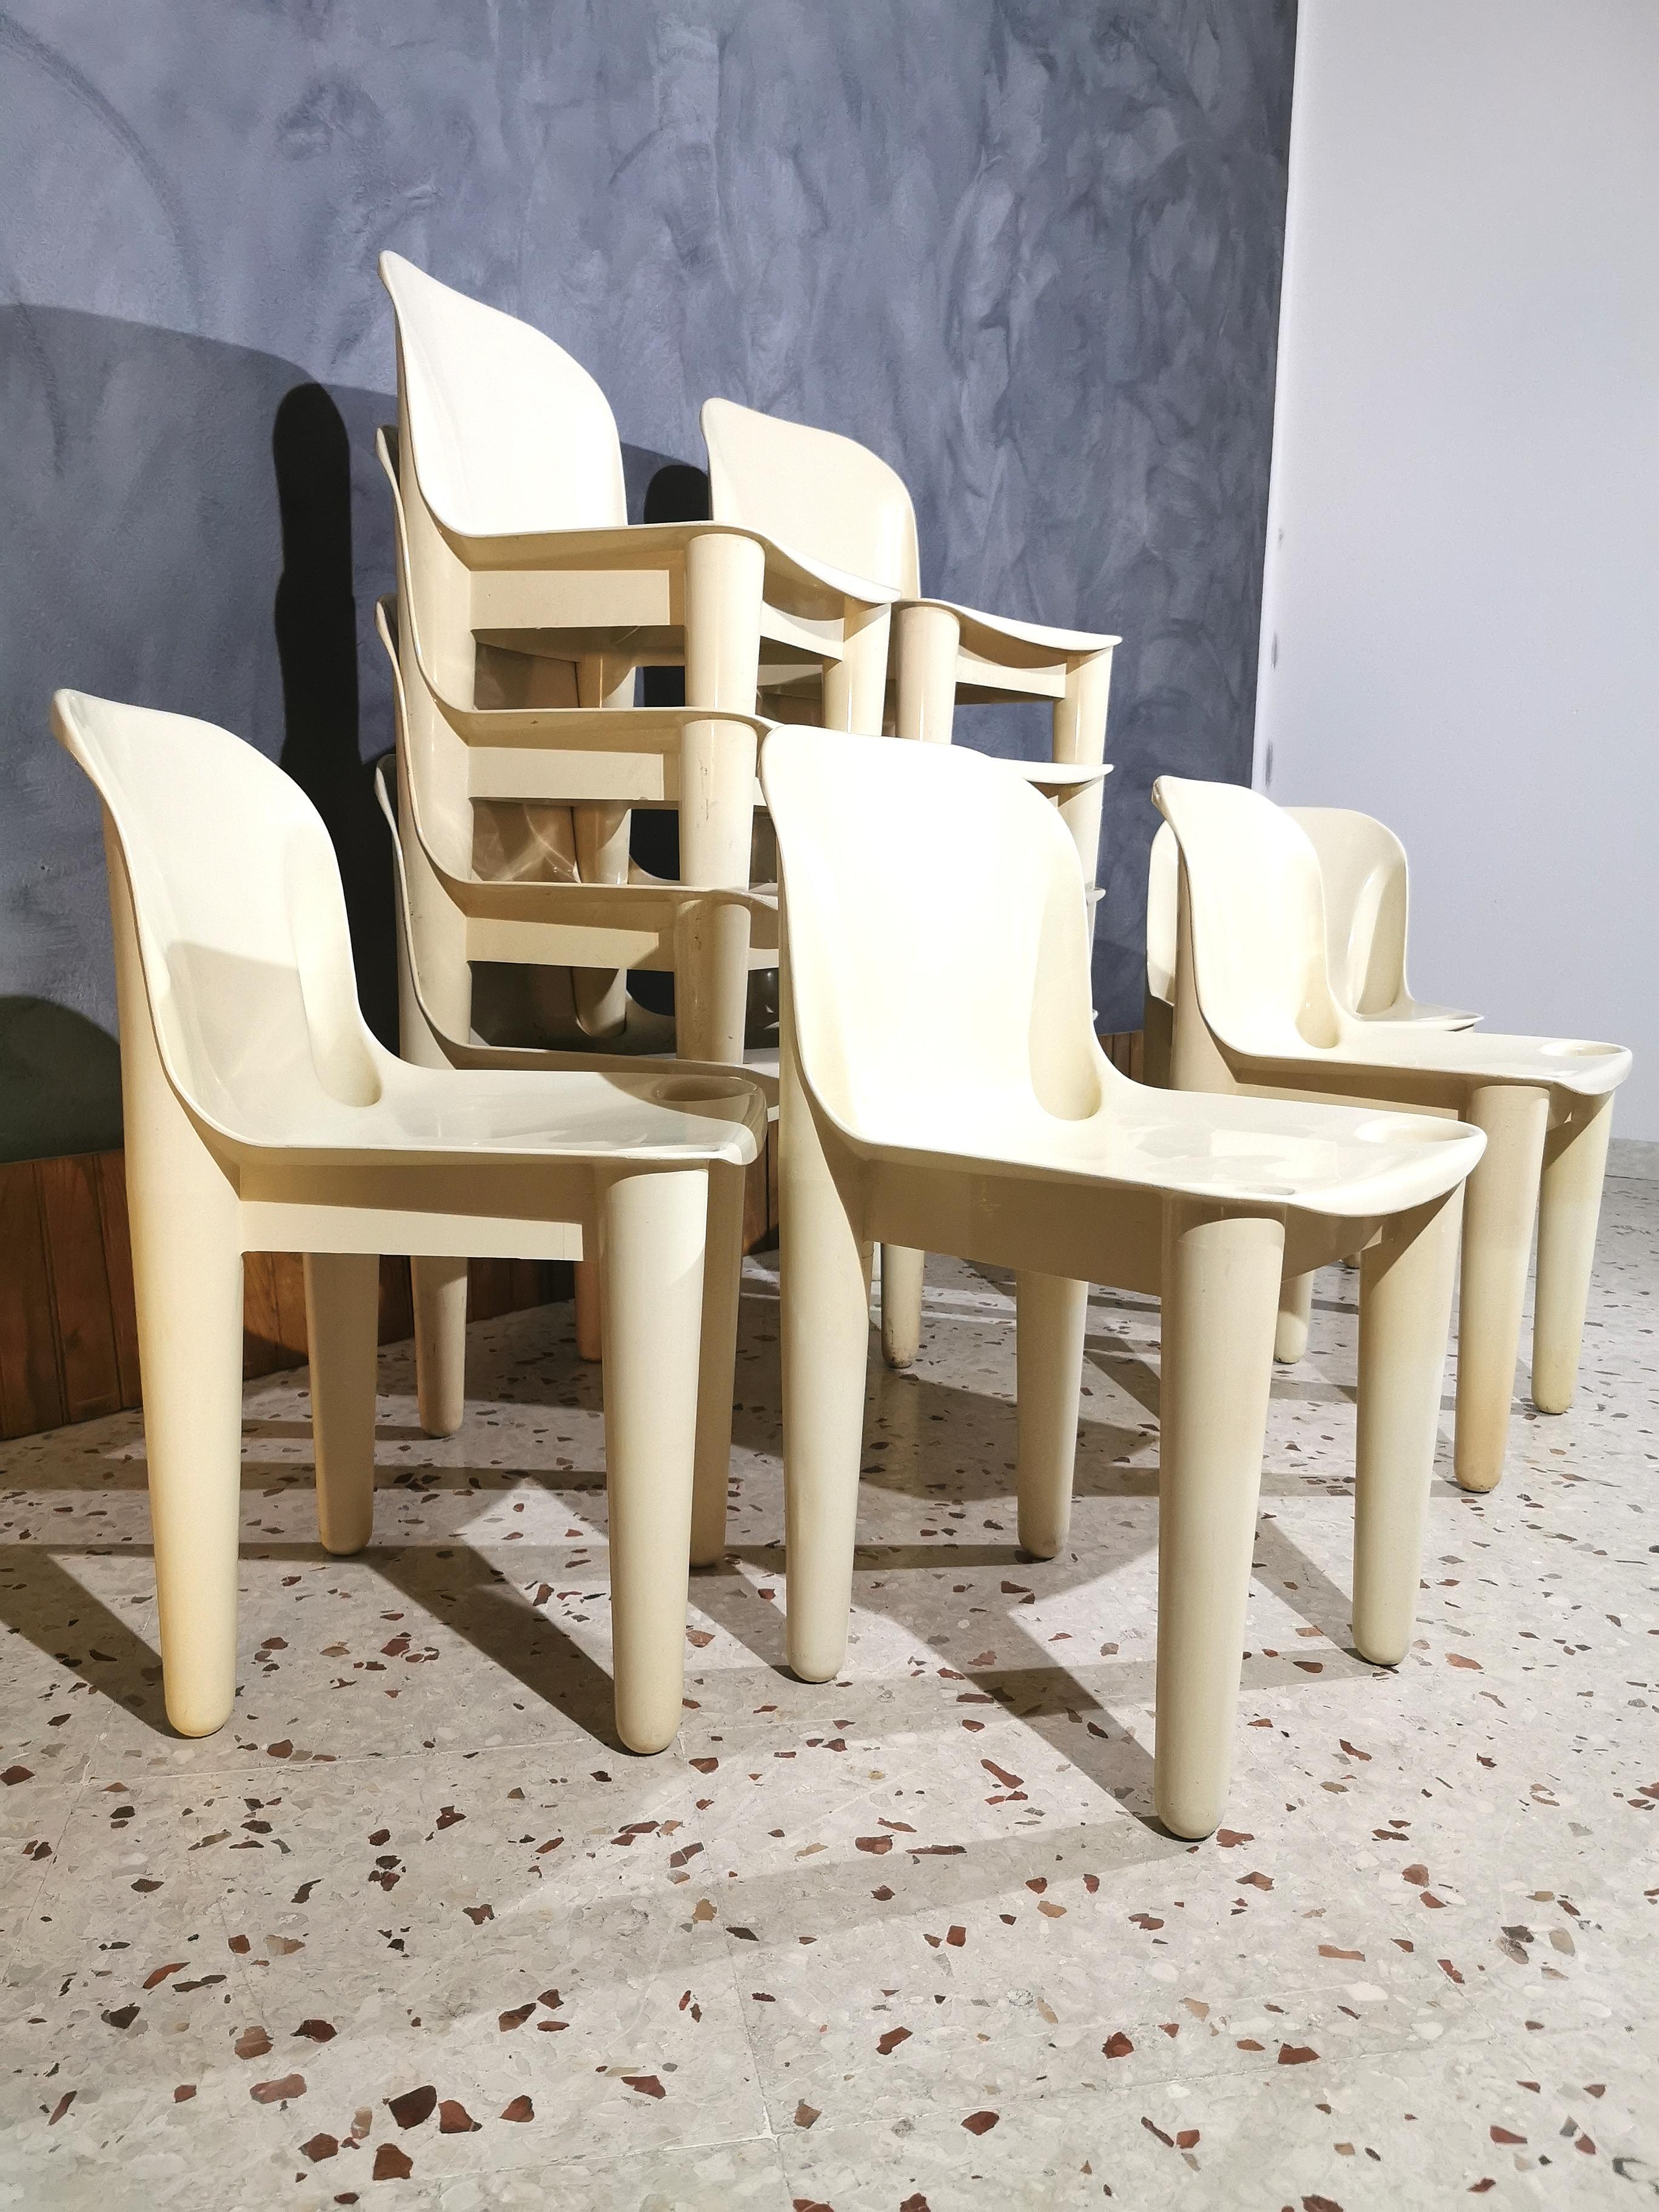 Particular set of 12 garden chairs by Casa 70 'Dalvera in beige plastic, Italian production, 1970s'.